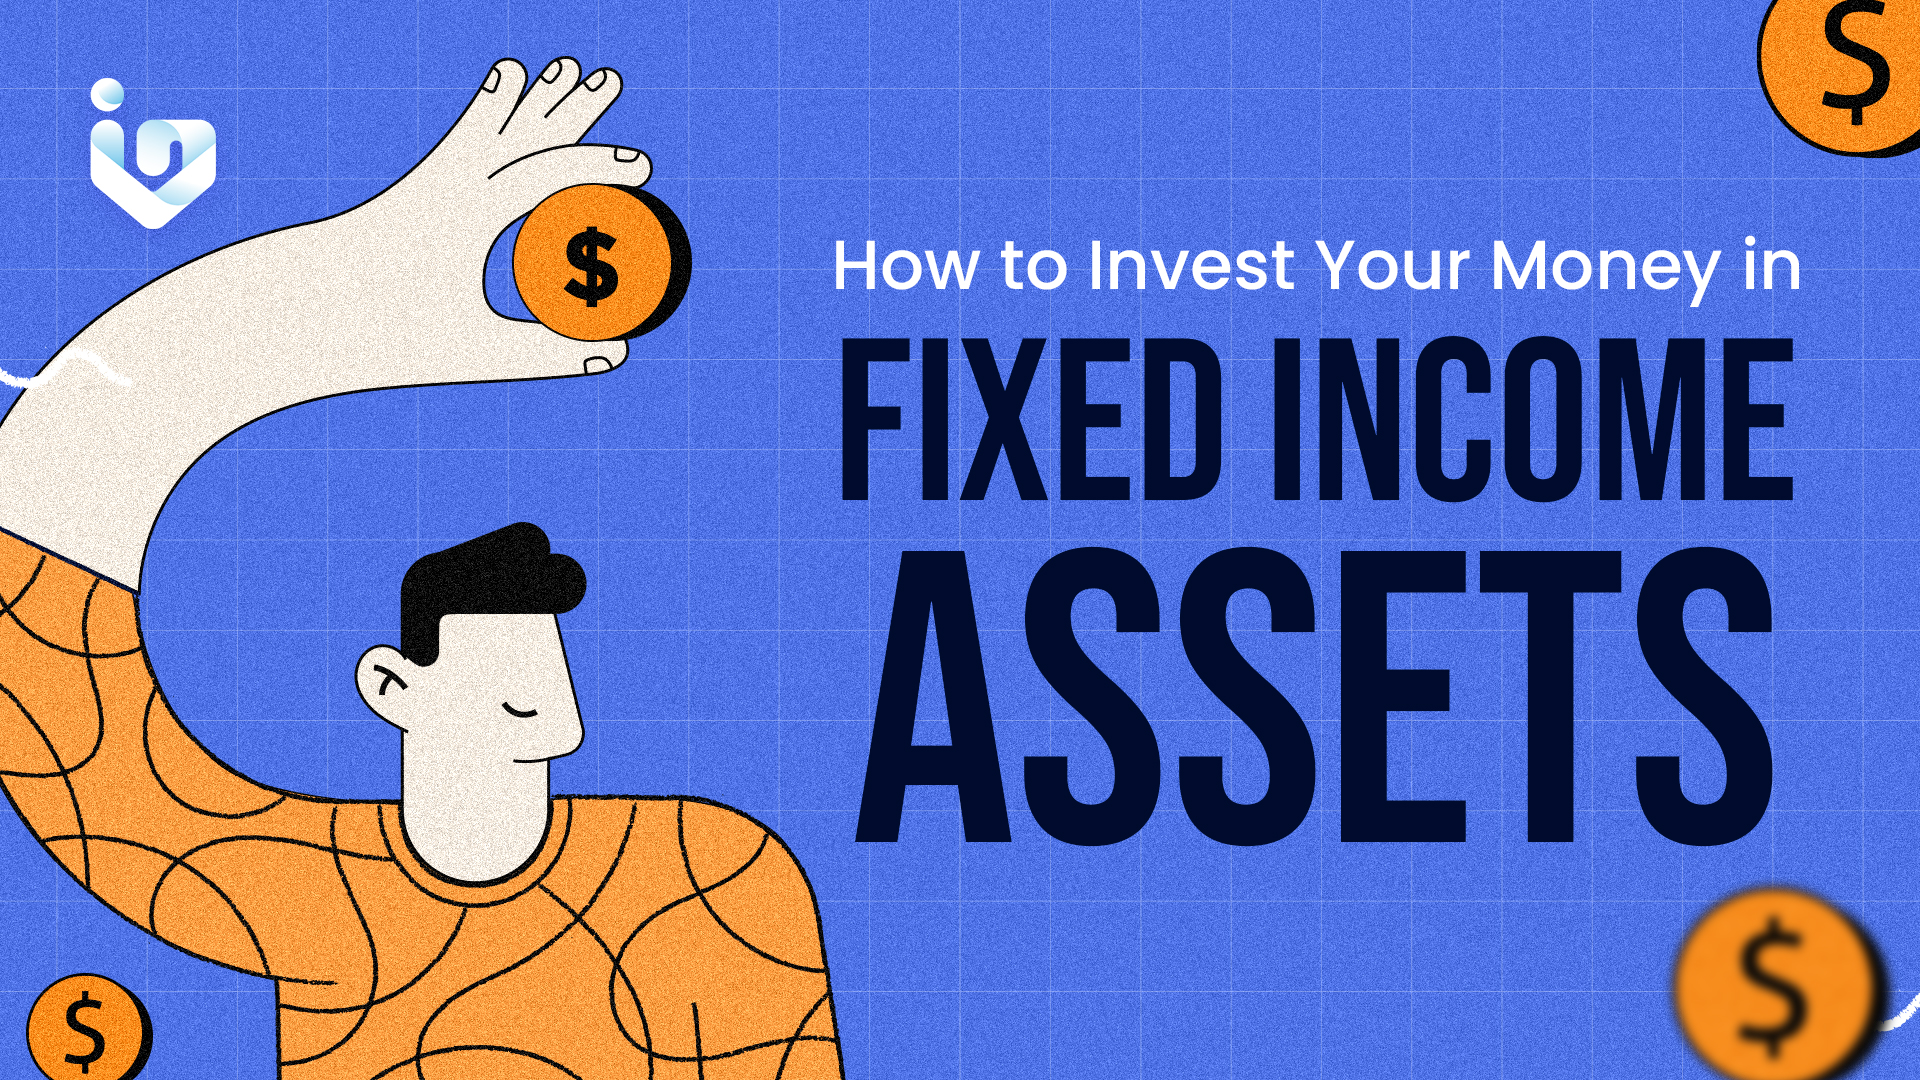 How to Invest Your Money in Fixed Income Assets